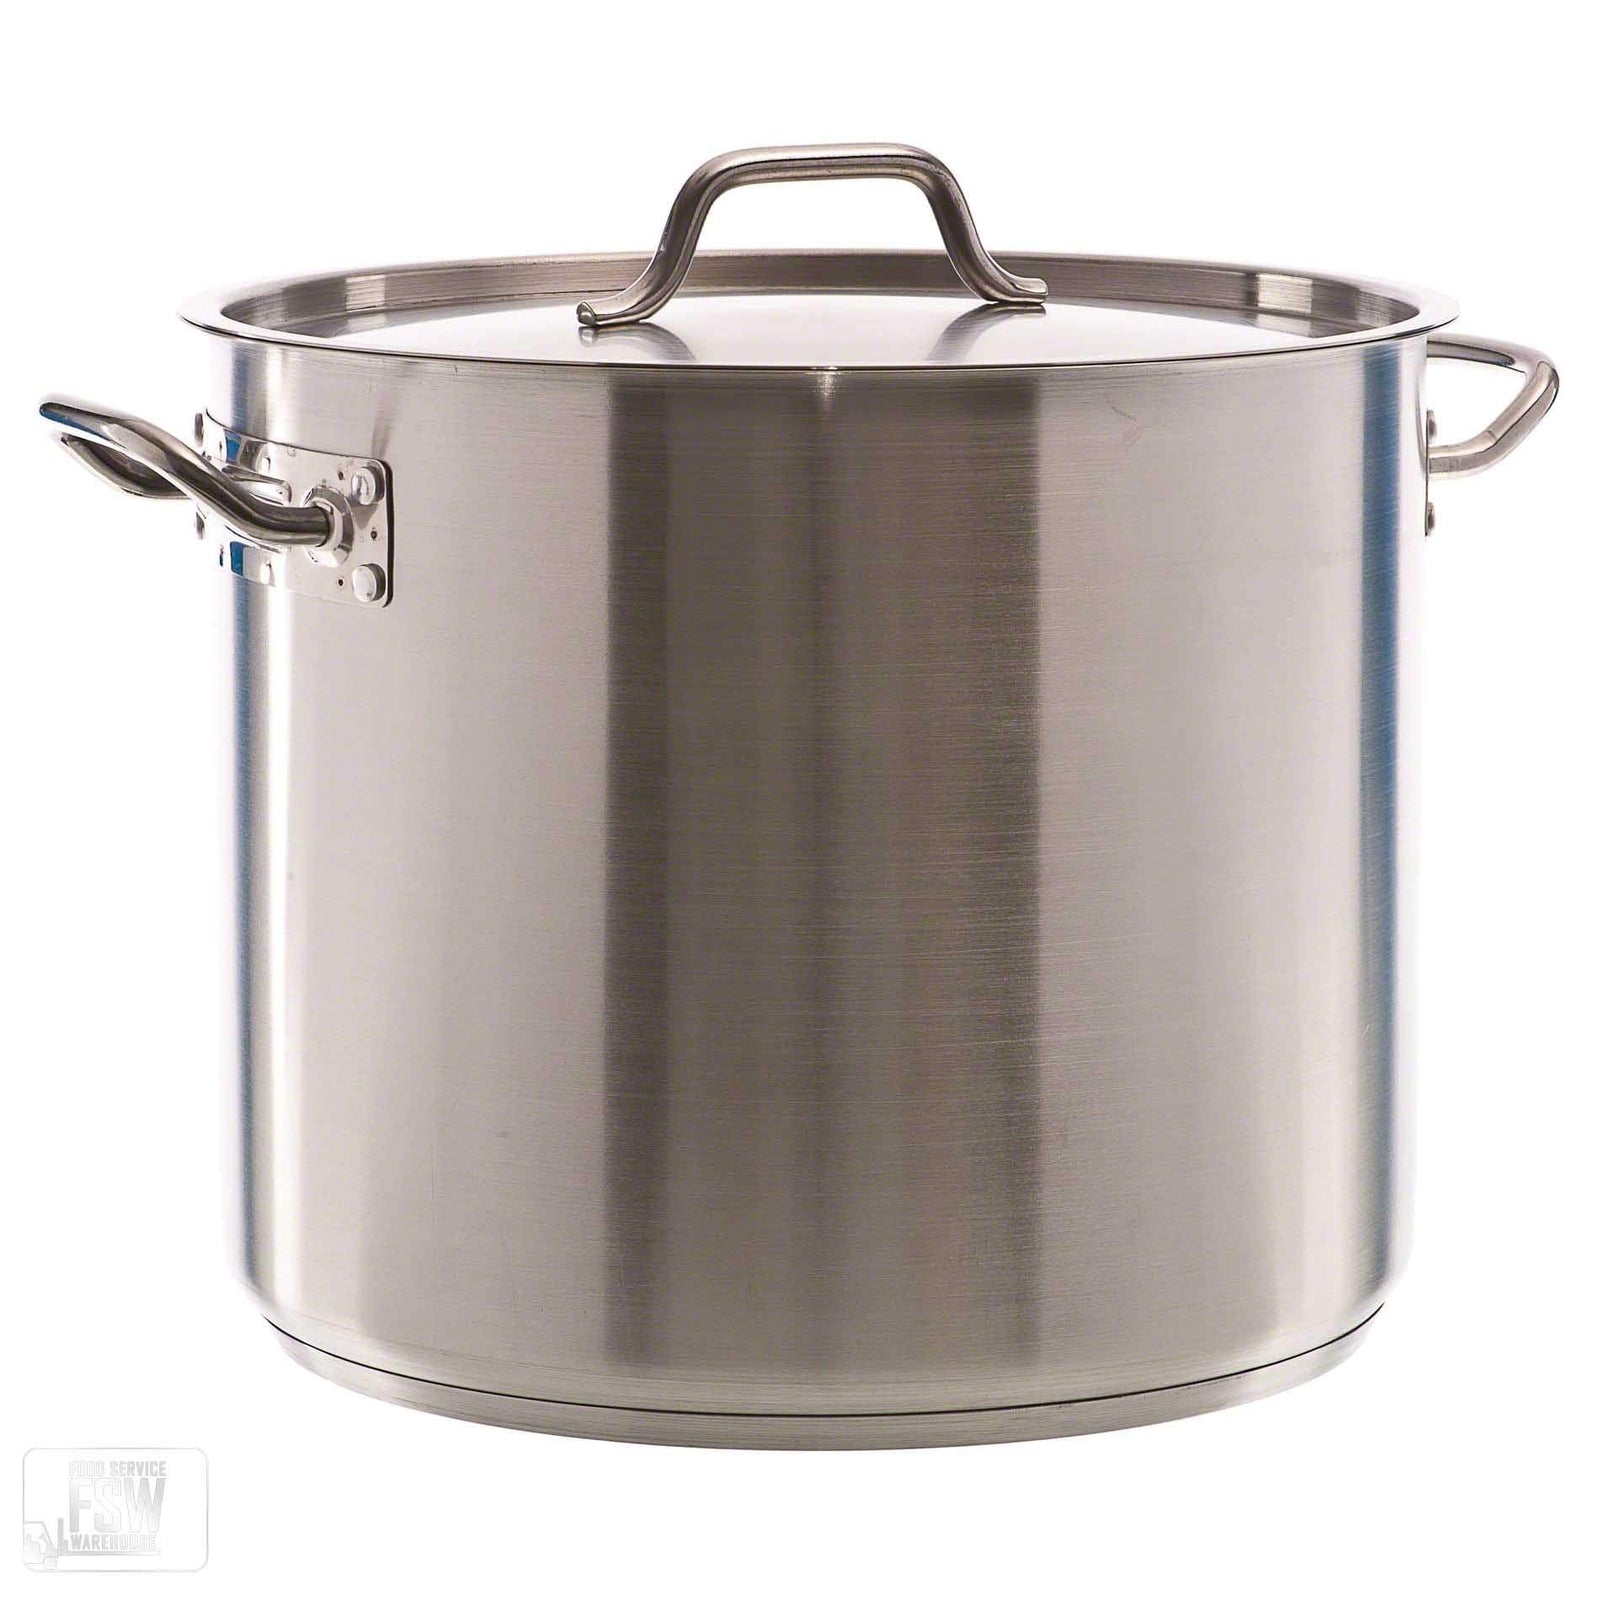 Cuisinart Stock Pot Stainless Steel 8 Quart 766-24 Cooking Stockpot with Lid